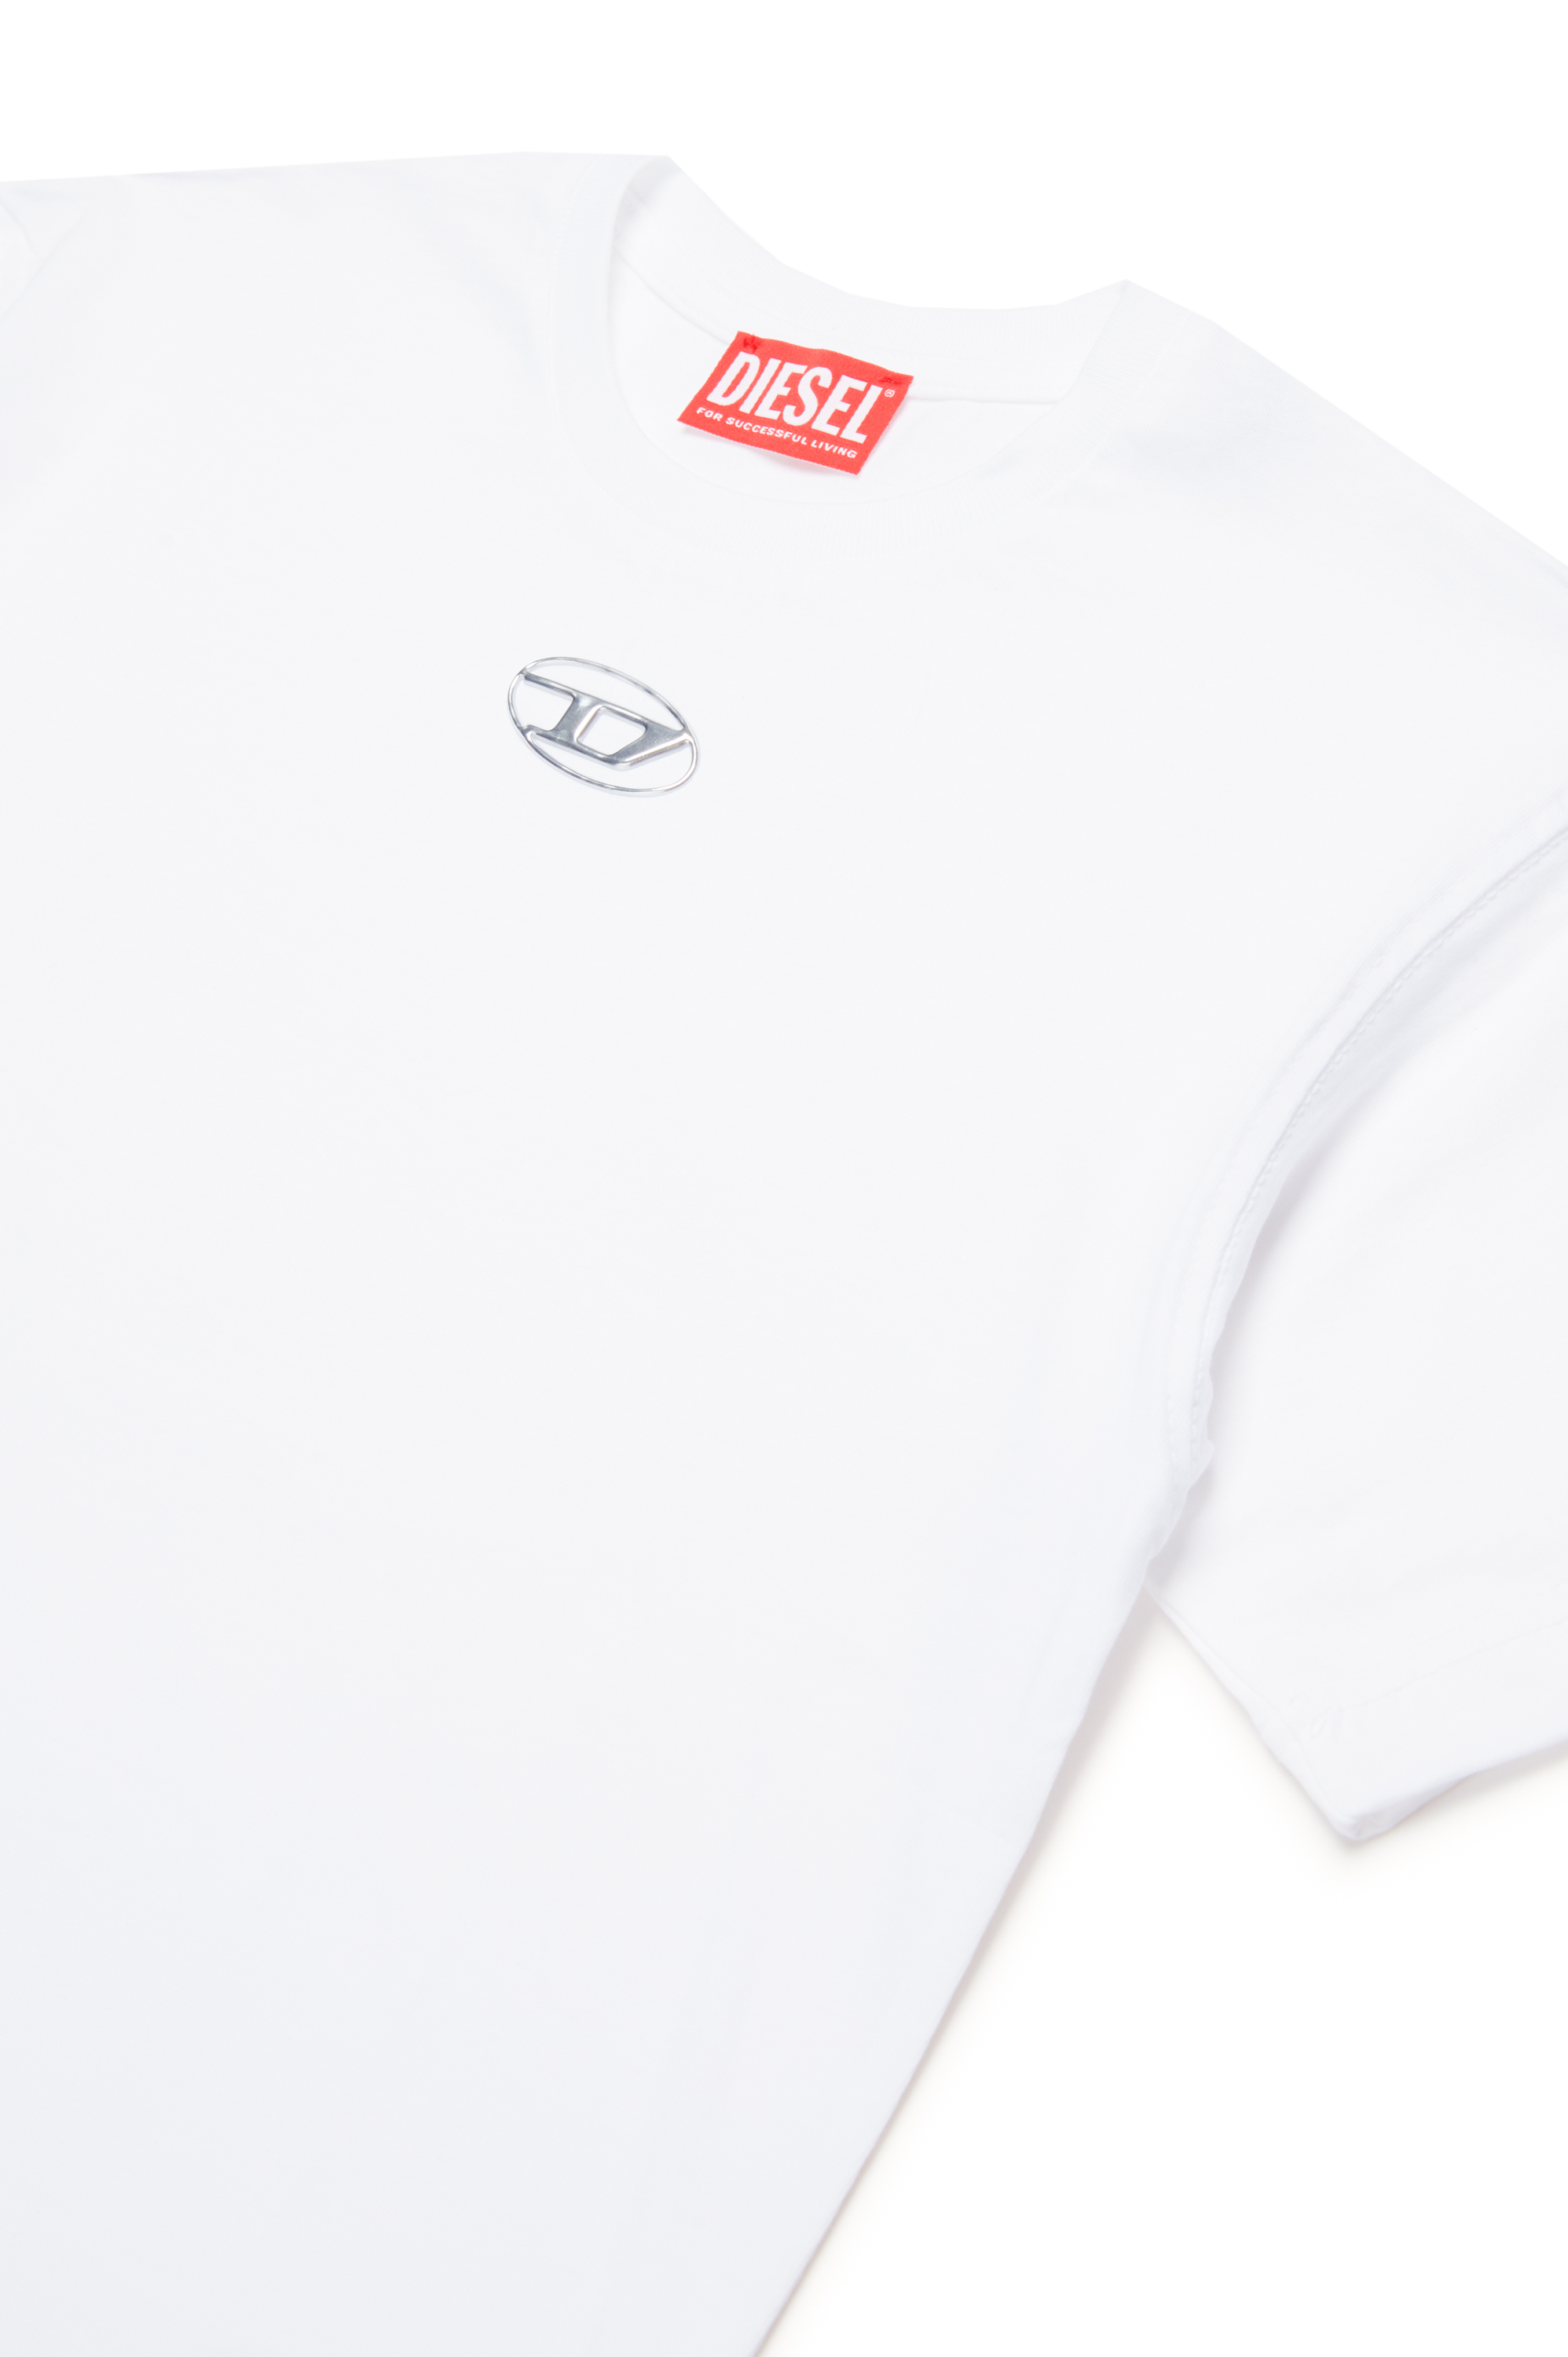 Diesel - TMARCUS OVER, Man T-shirt with metallic Oval D in White - Image 3